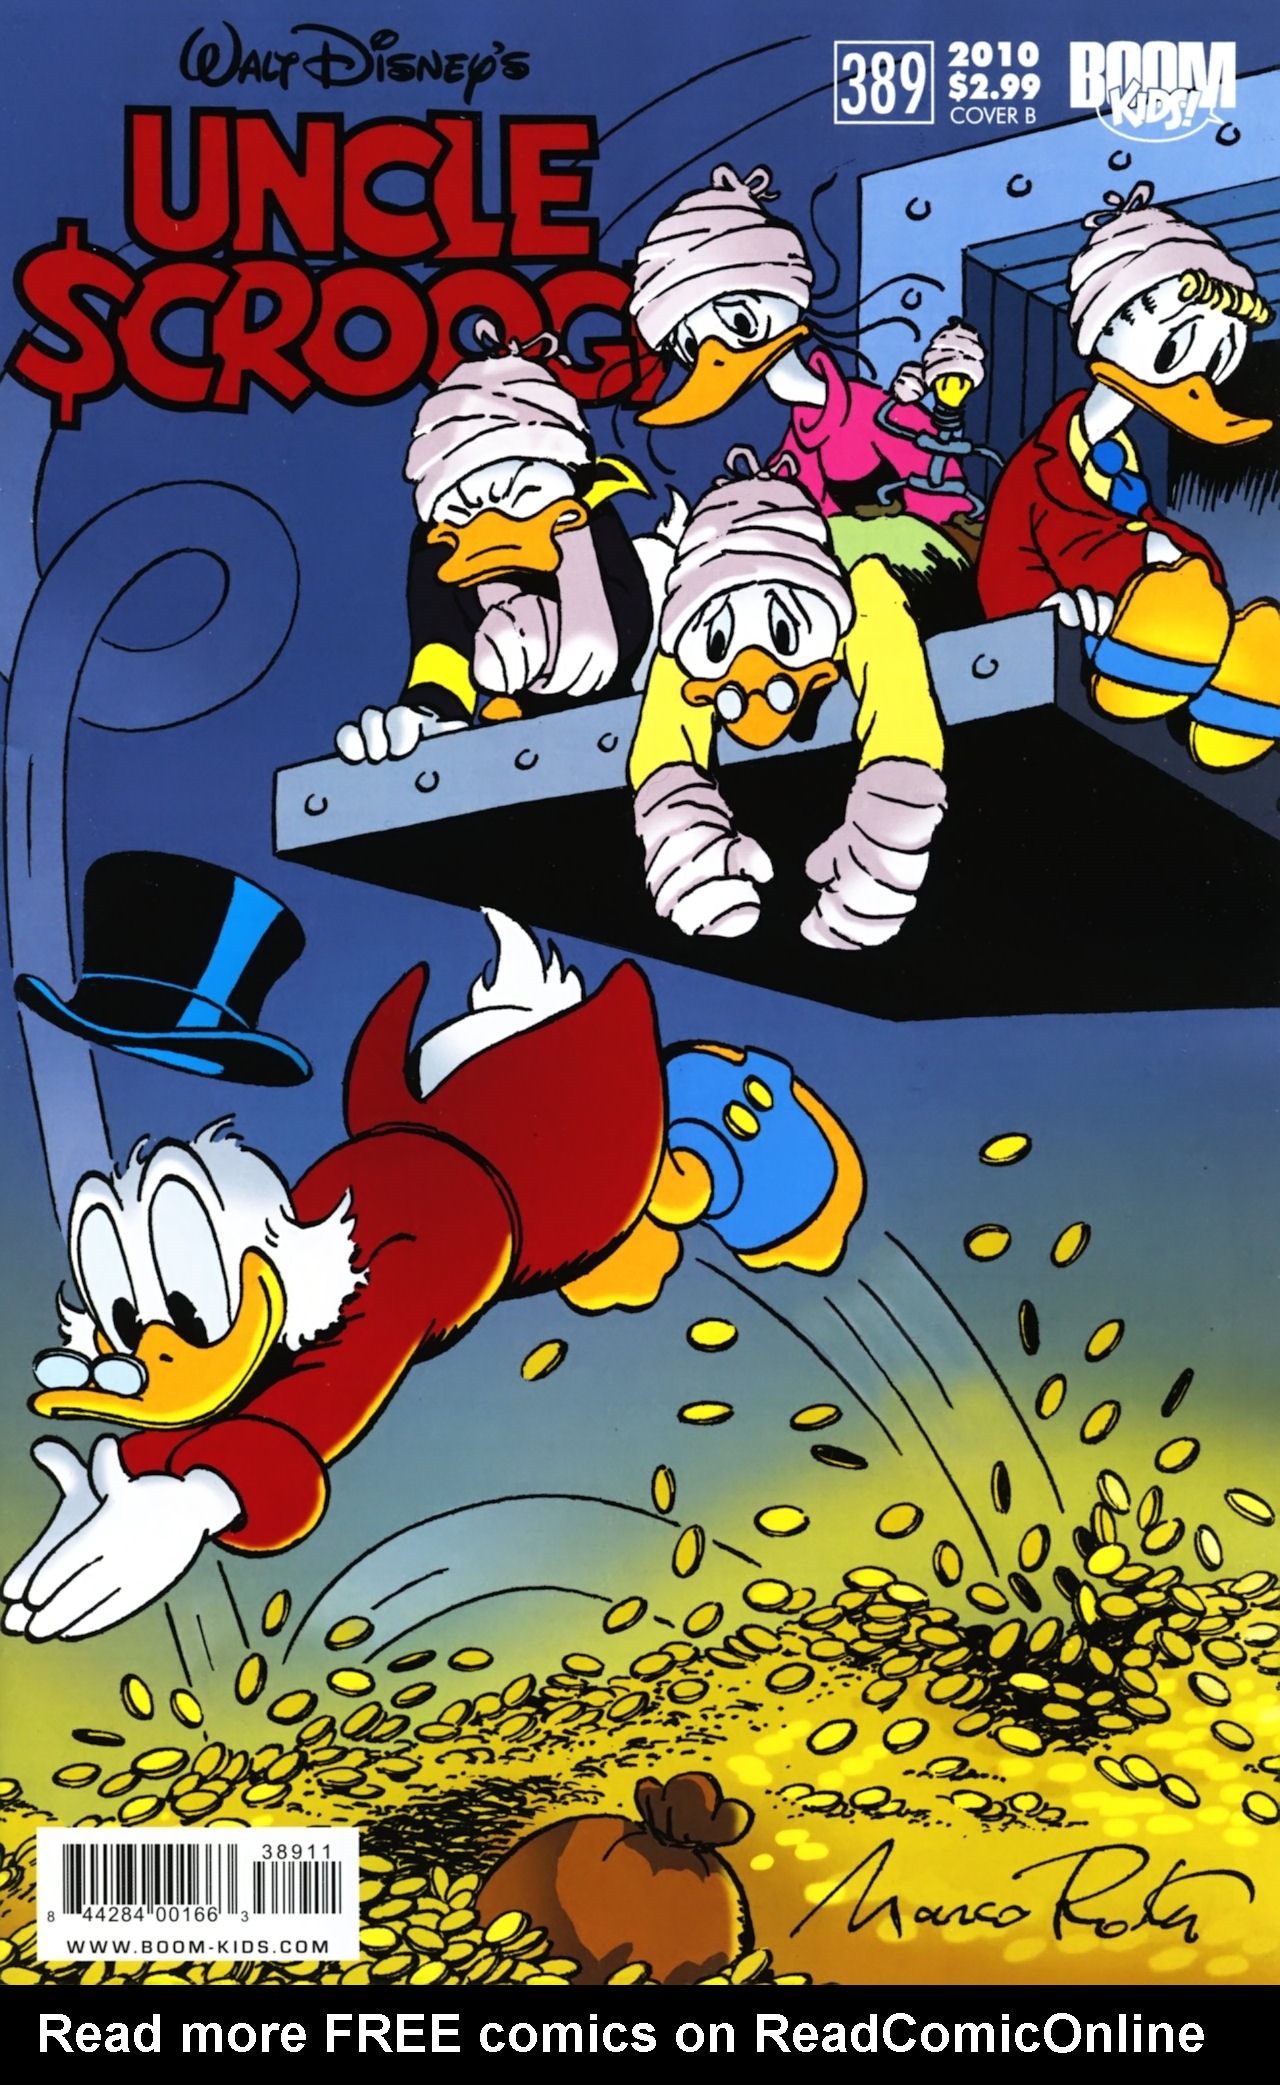 Read online Uncle Scrooge (2009) comic -  Issue #389 - 2